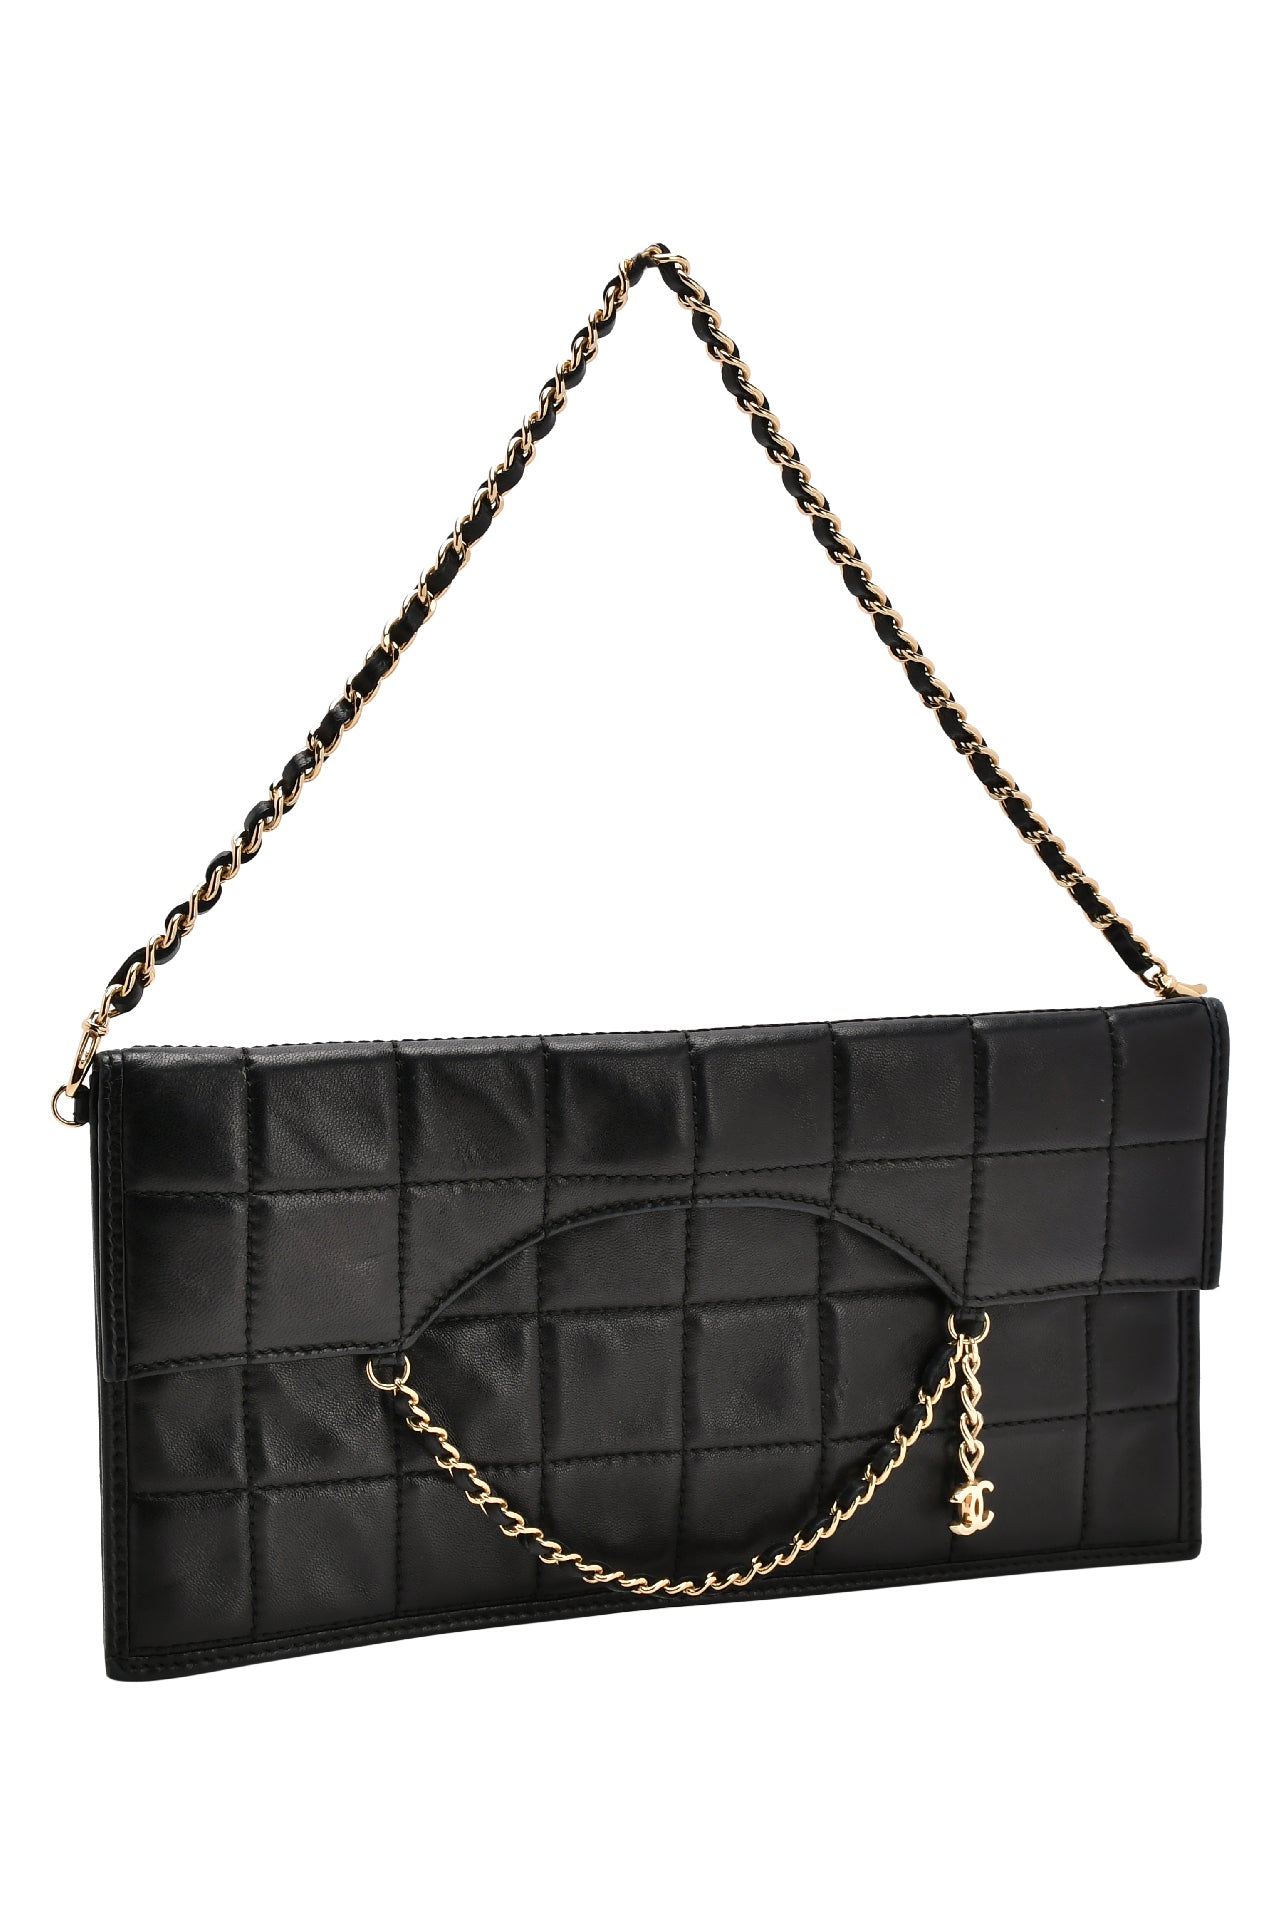 Chanel Box Quilted Fold Down Envelope Clutch Bag